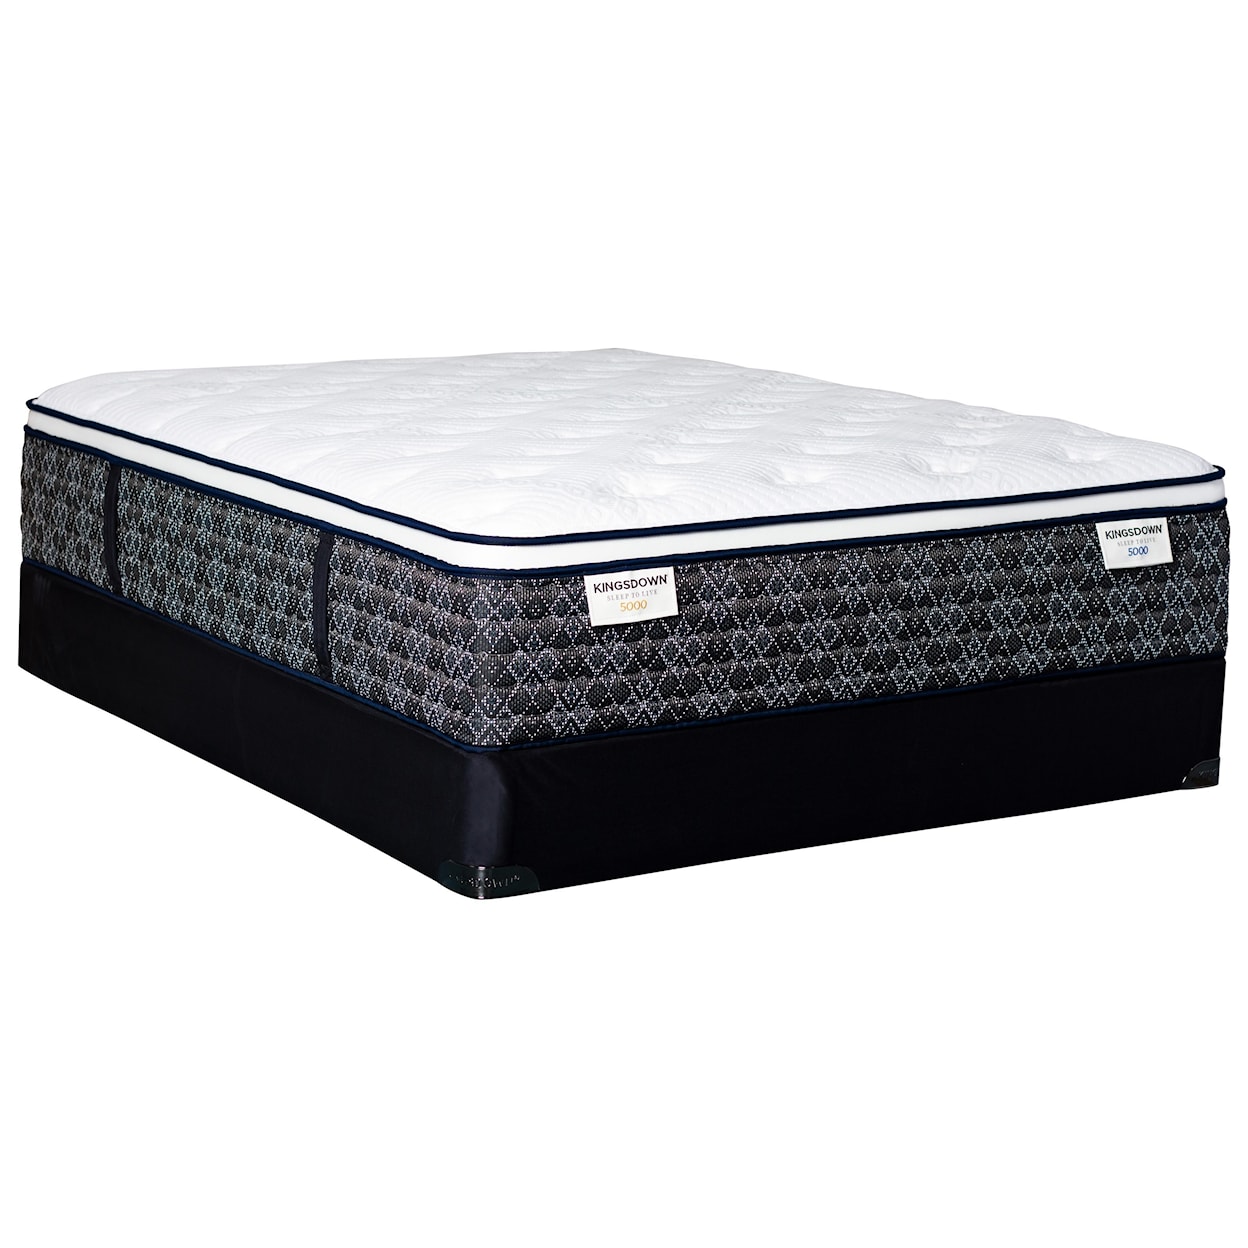 Kingsdown Sleep to Live 5000 Gold Blue ET Twin Pocketed Coil Mattress LoPro Set